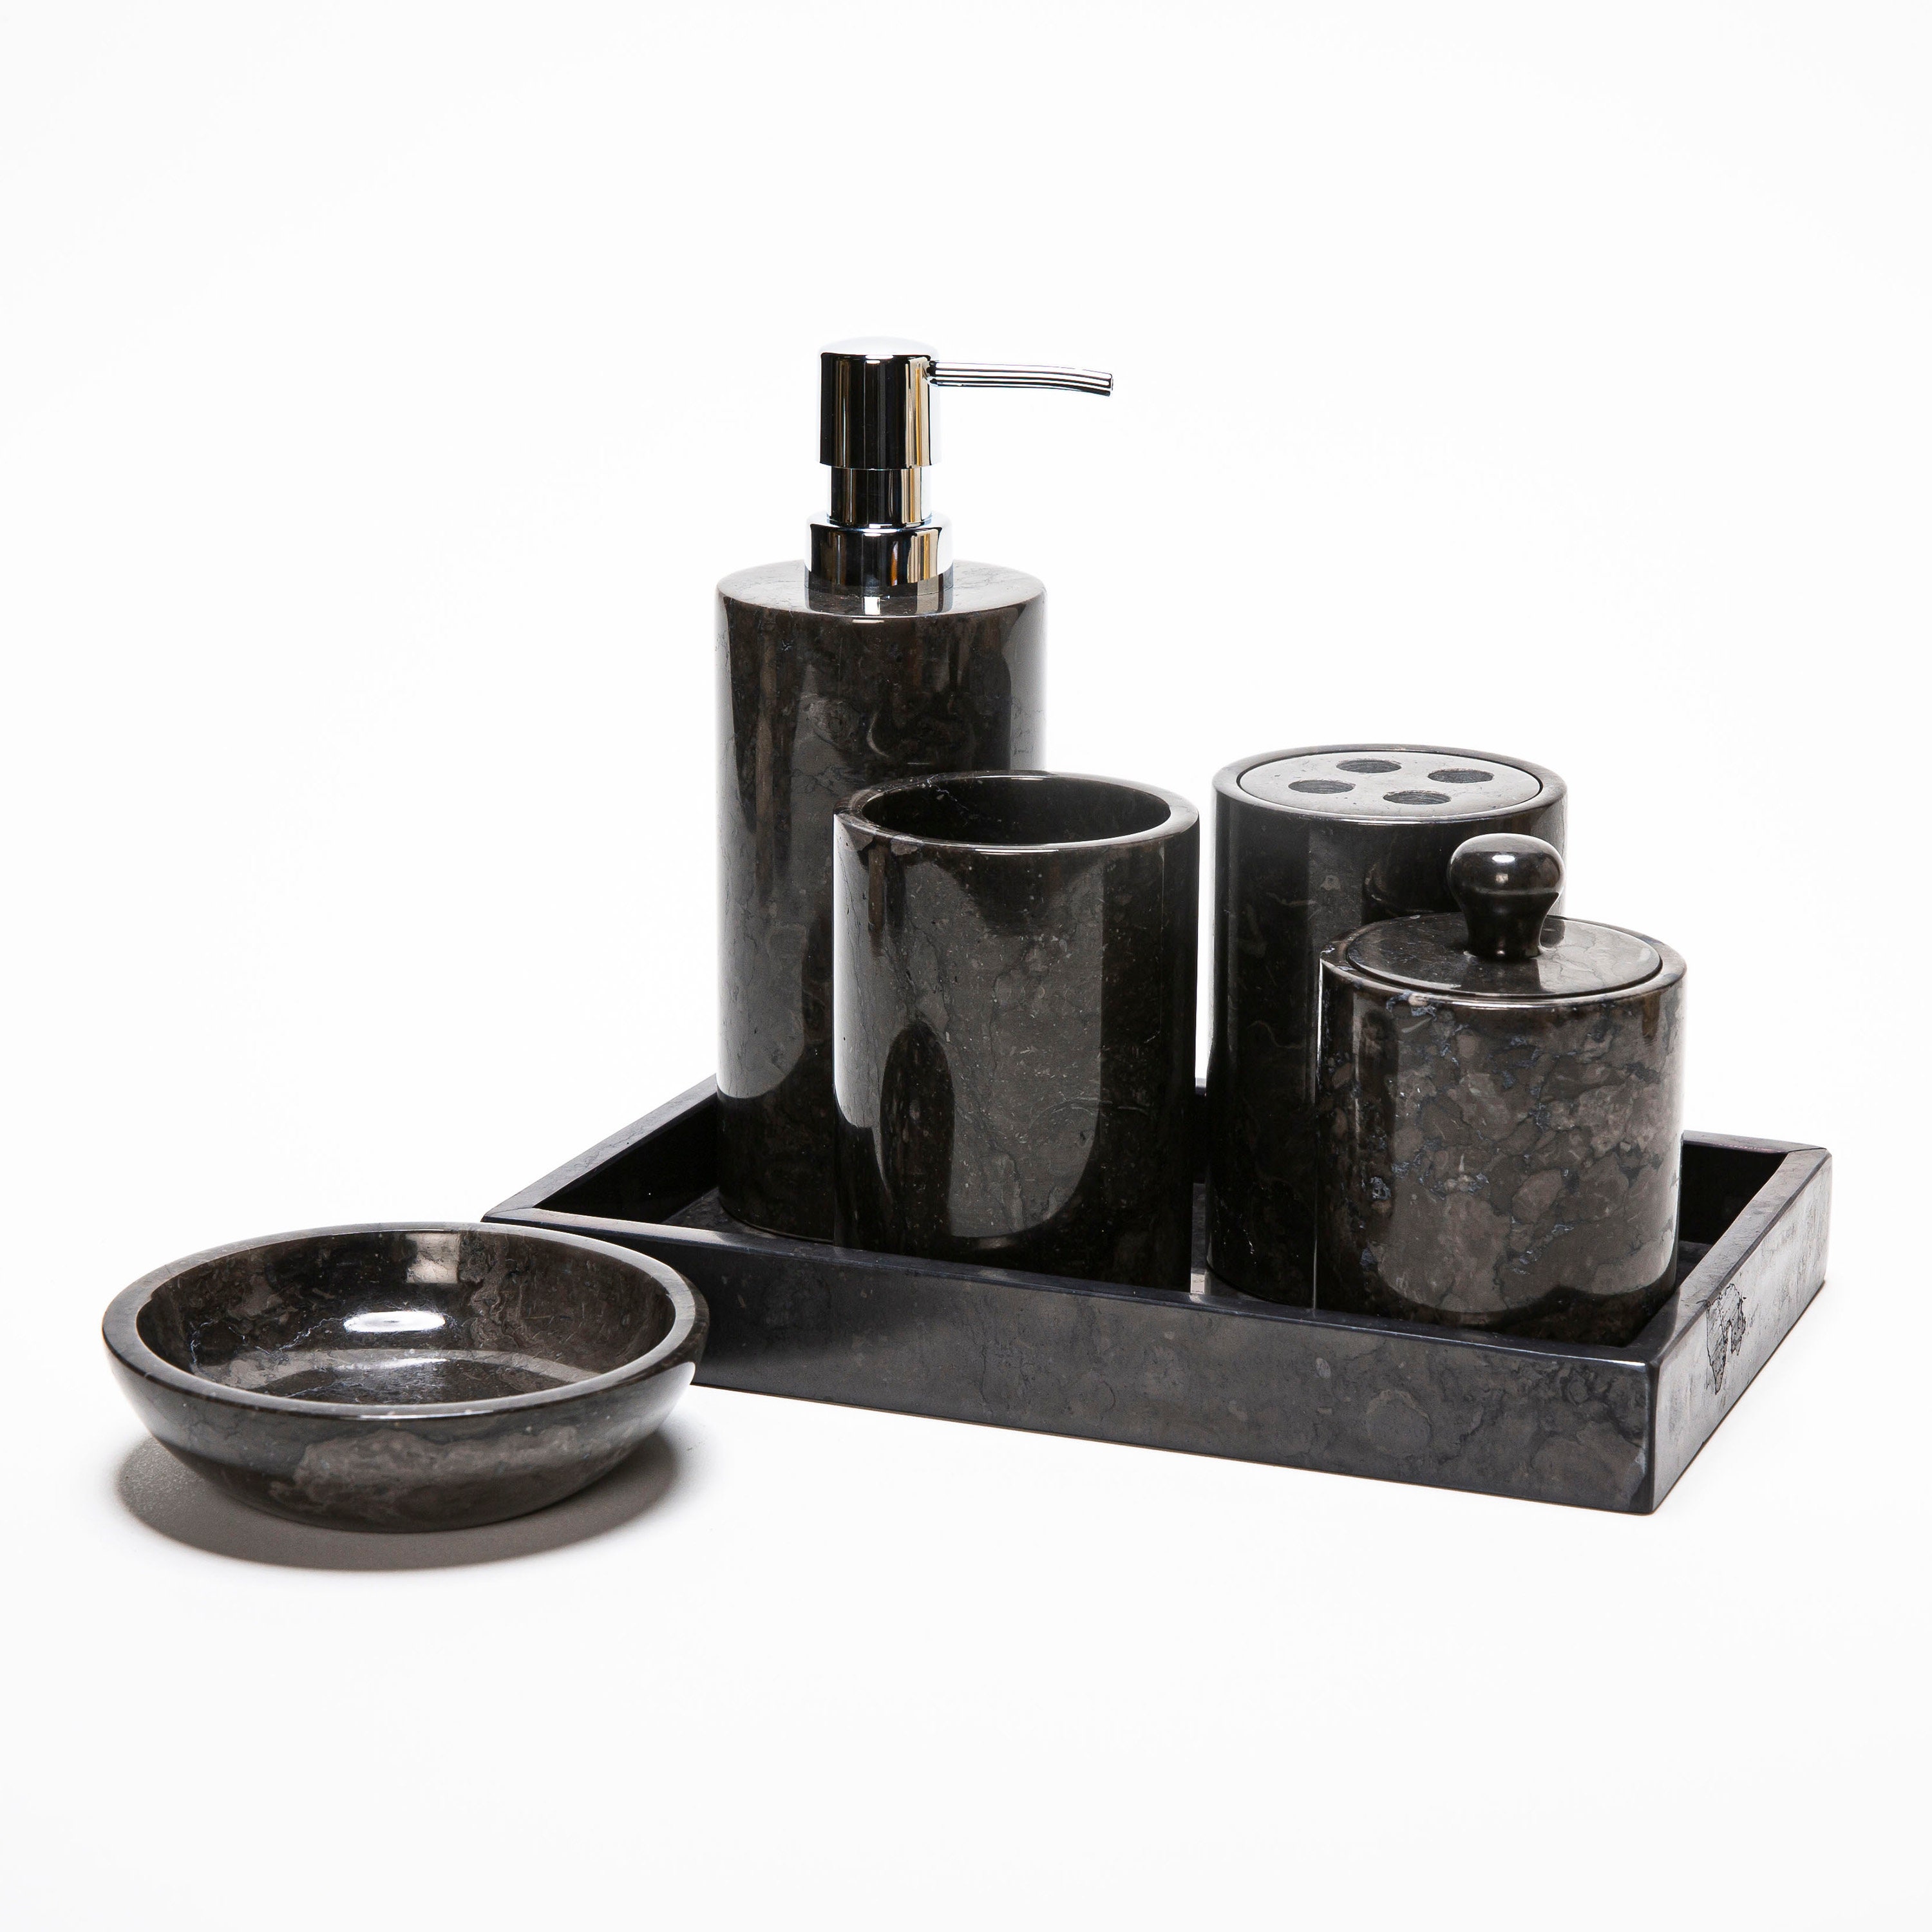 Modern Black Marble 5 Piece Bathroom Accessories Set Stone from China 